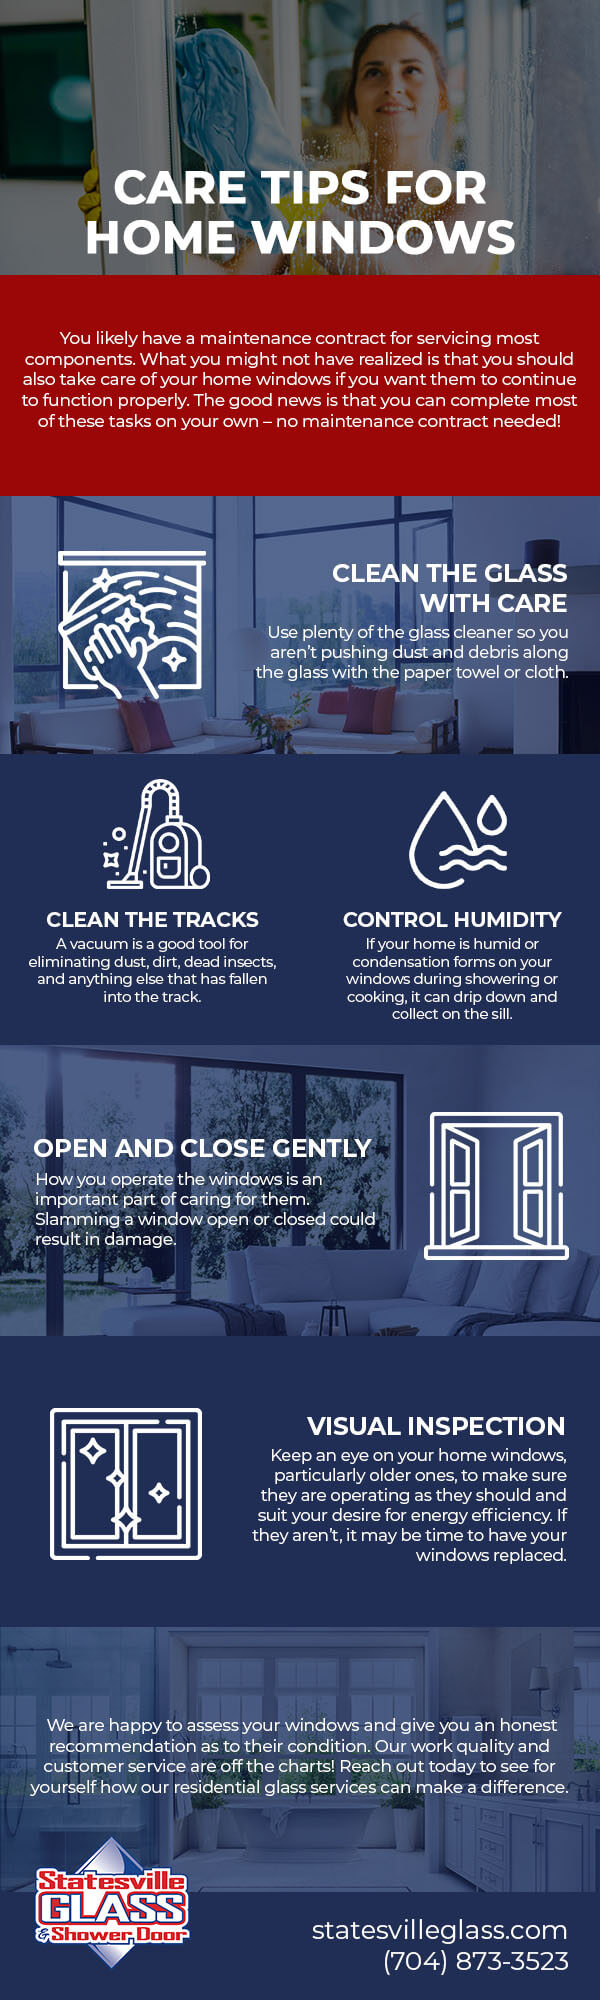 Care Tips for Home Windows